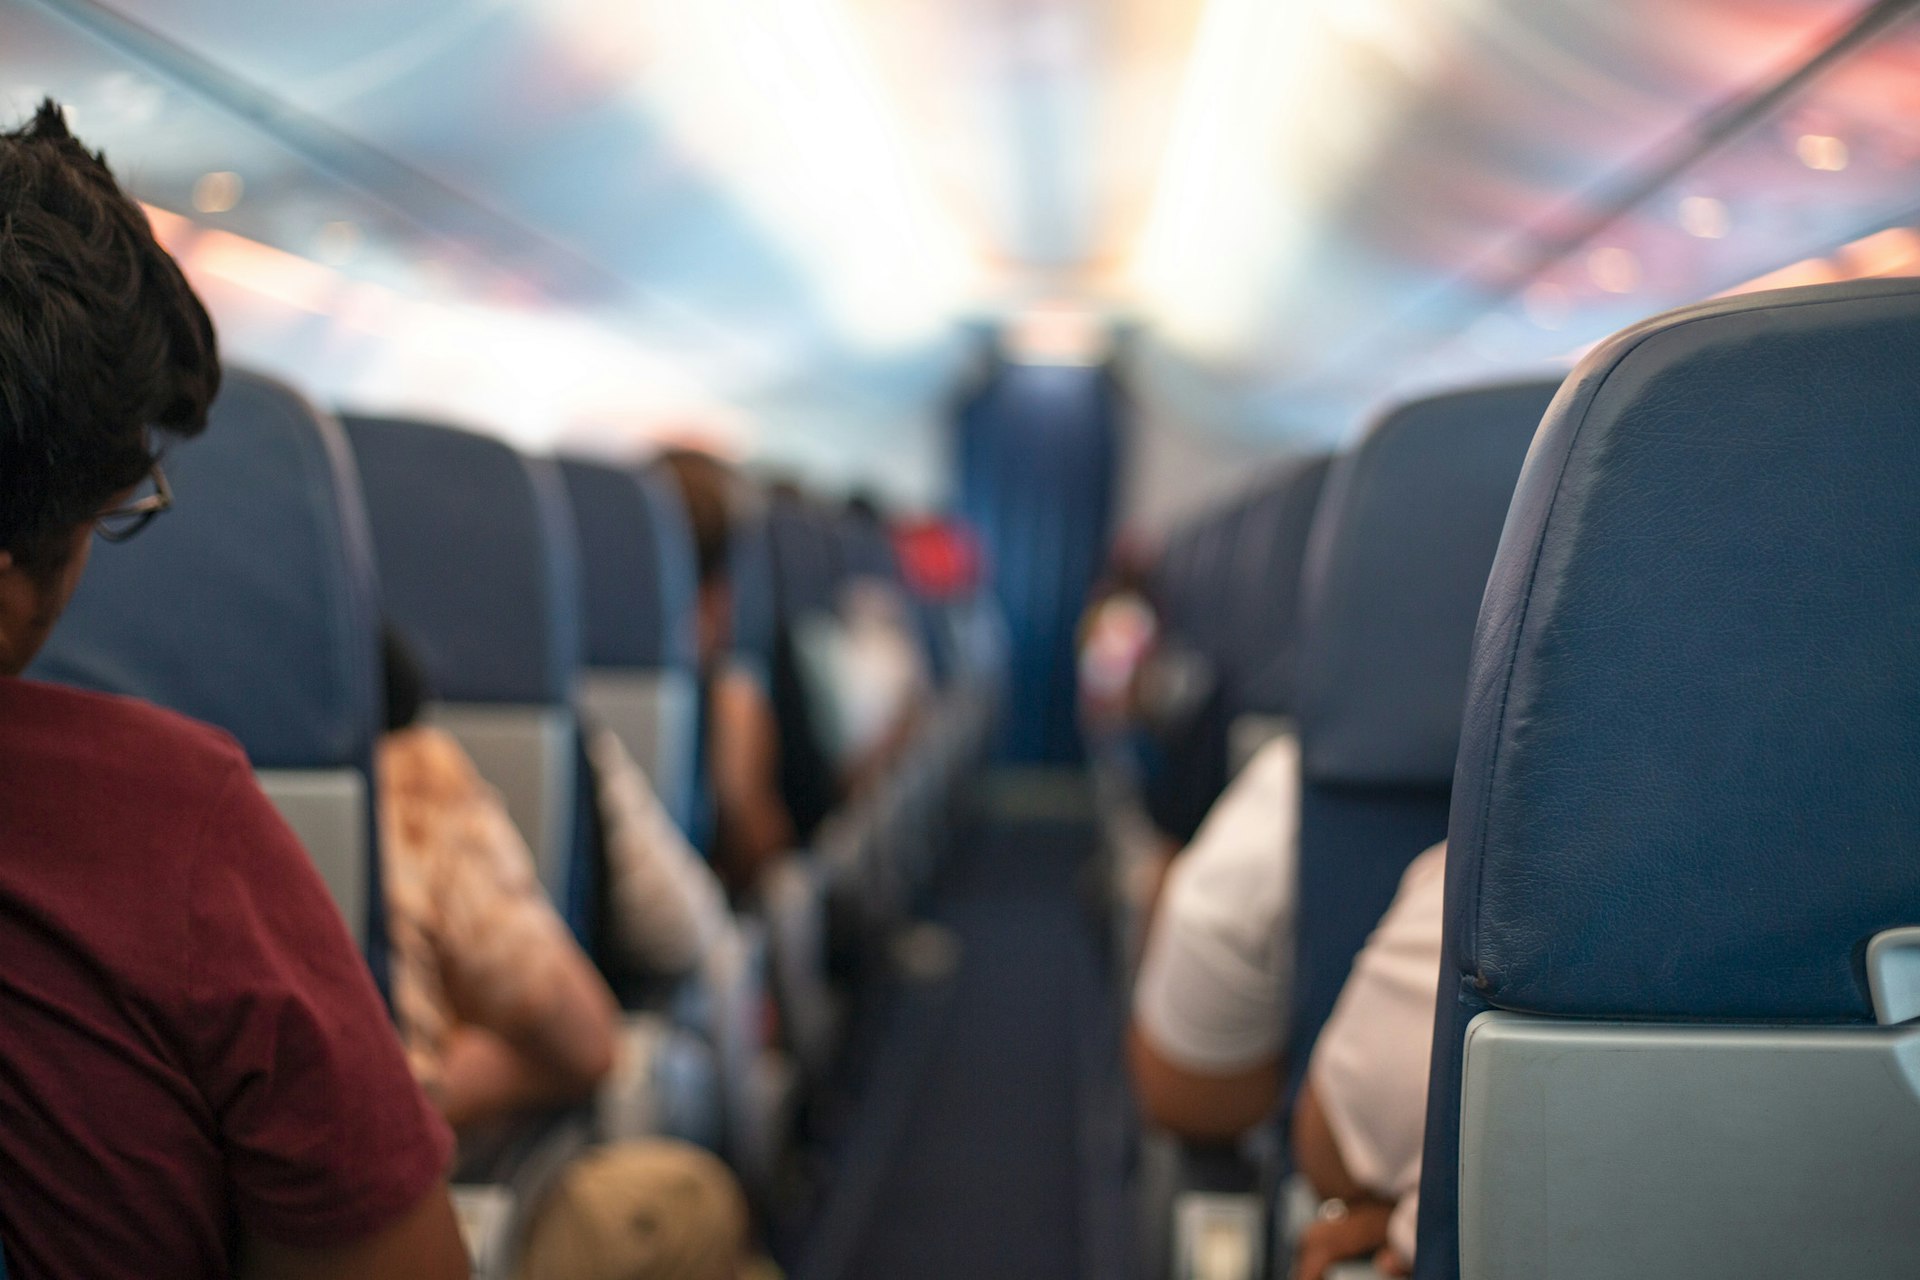 A shot down the empty aisle of an aircraft with all passengers in their seats 